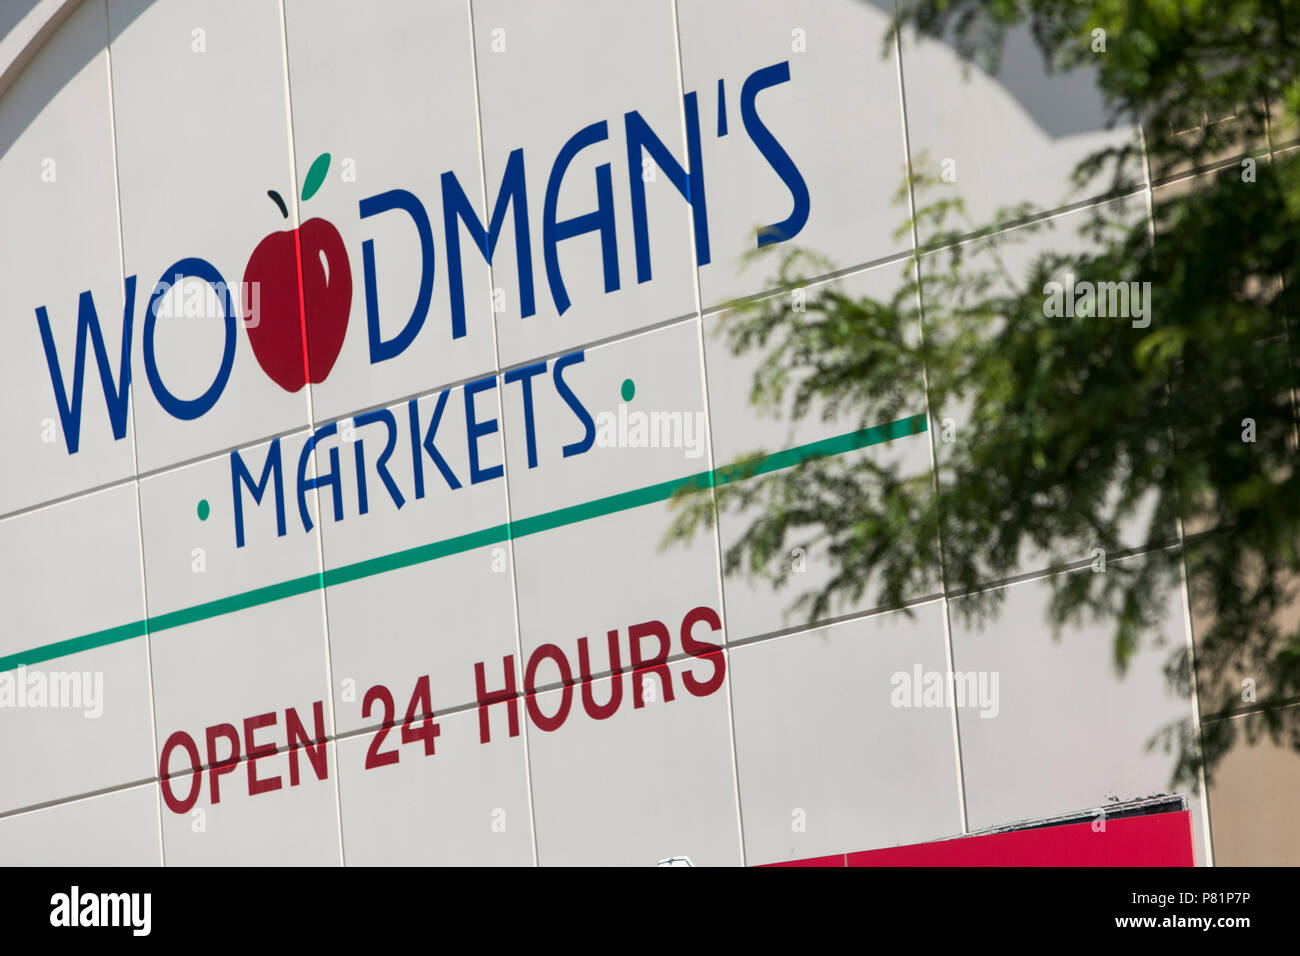 A logo sign outside of a Woodman's Markets grocery retail store in Menomonee Falls, Wisconsin, on June 24, 2018. Stock Photo